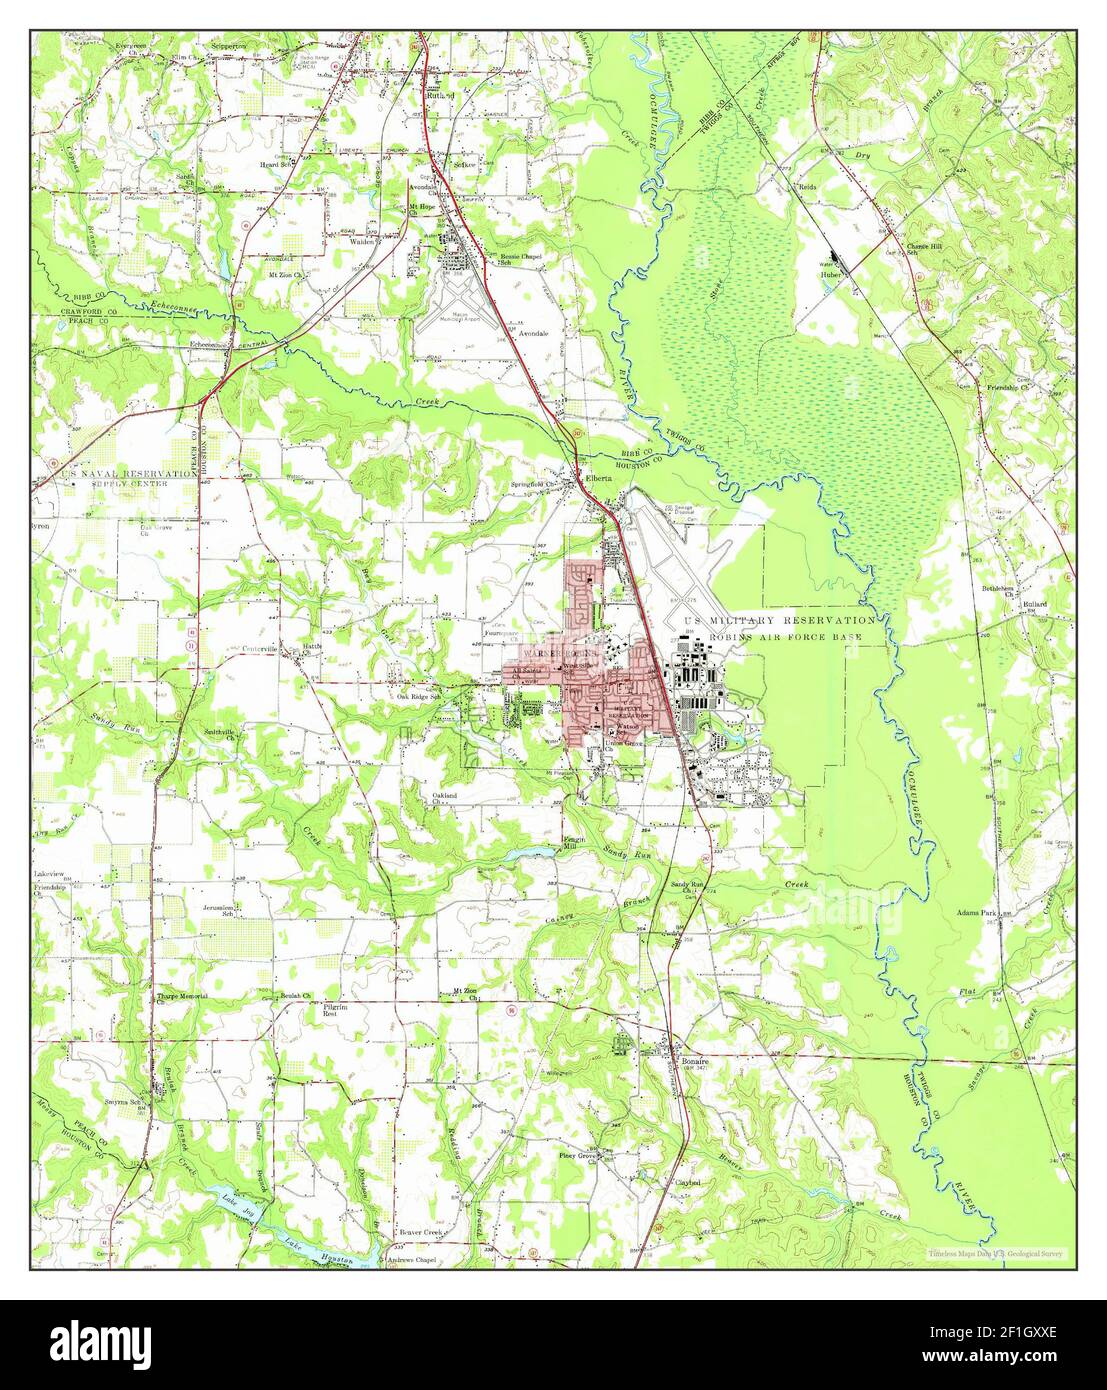 Warner Robins Georgia Map 1956 162500 United States Of America By Timeless Maps Data Us 1989